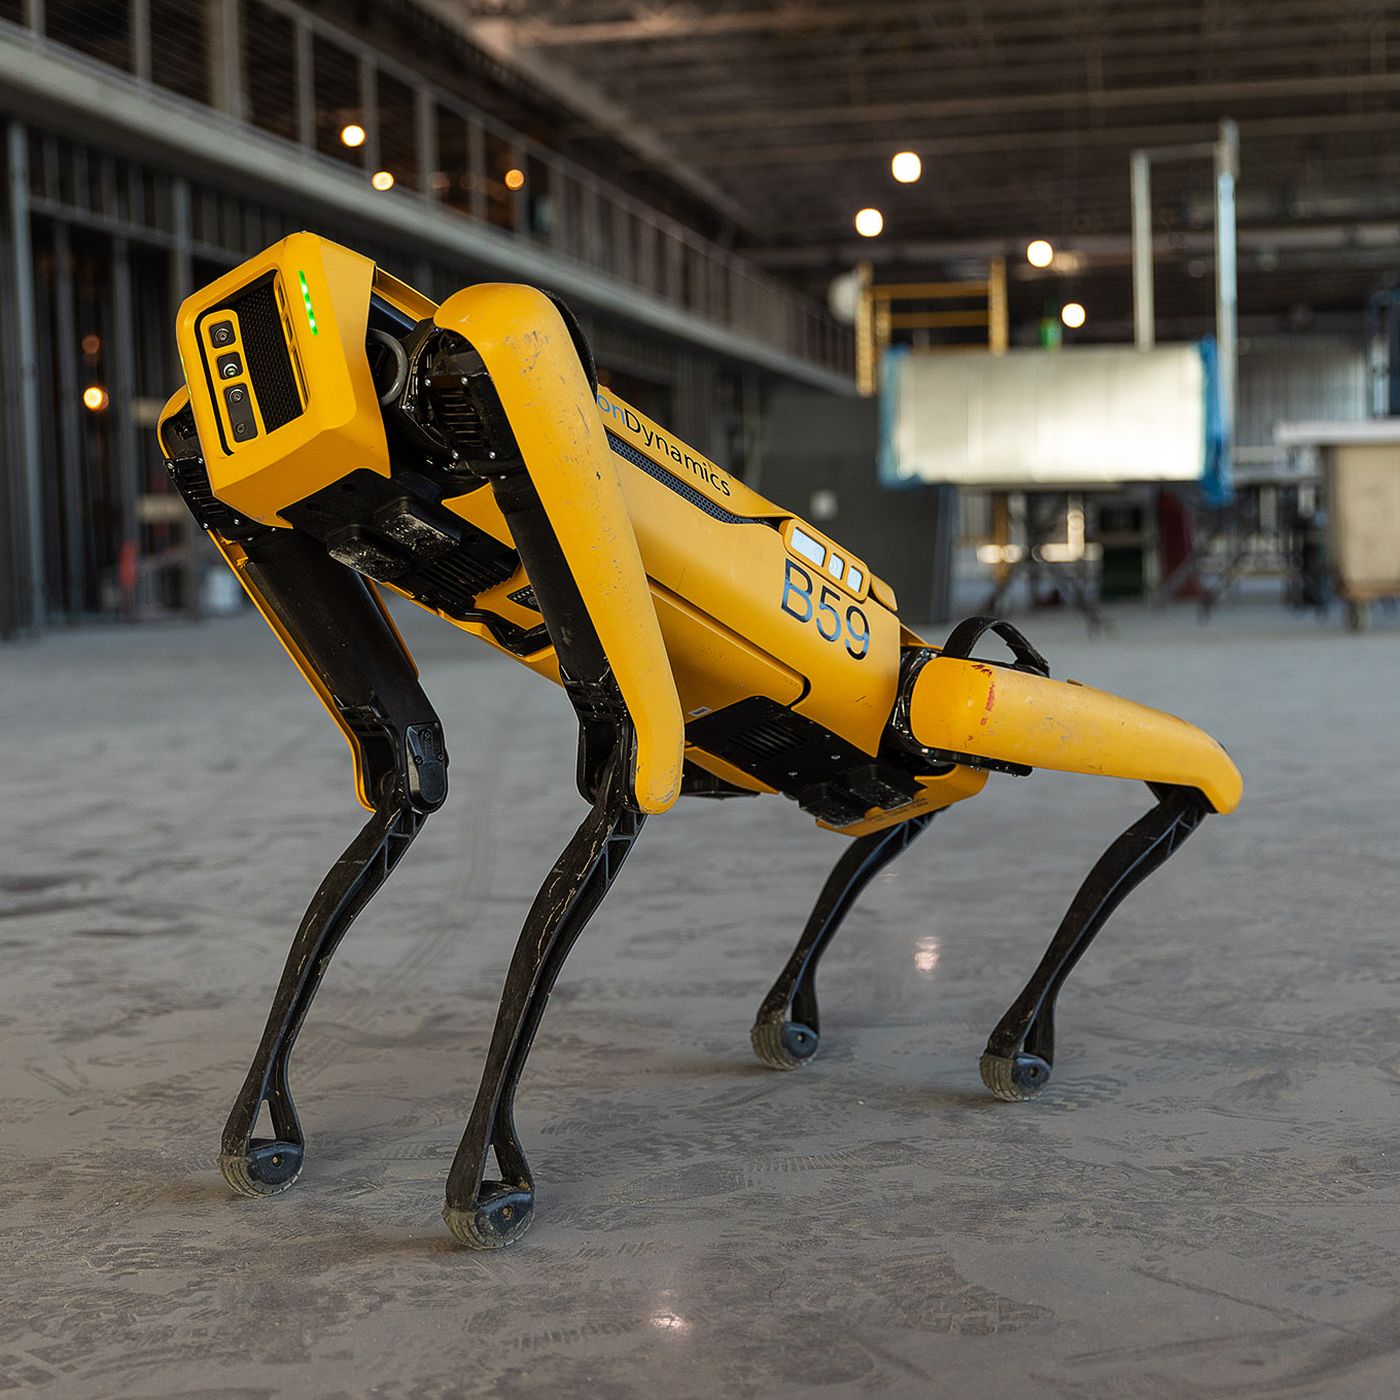 Boston Dynamics Is Now Selling Its Spot Robot... For 74,500